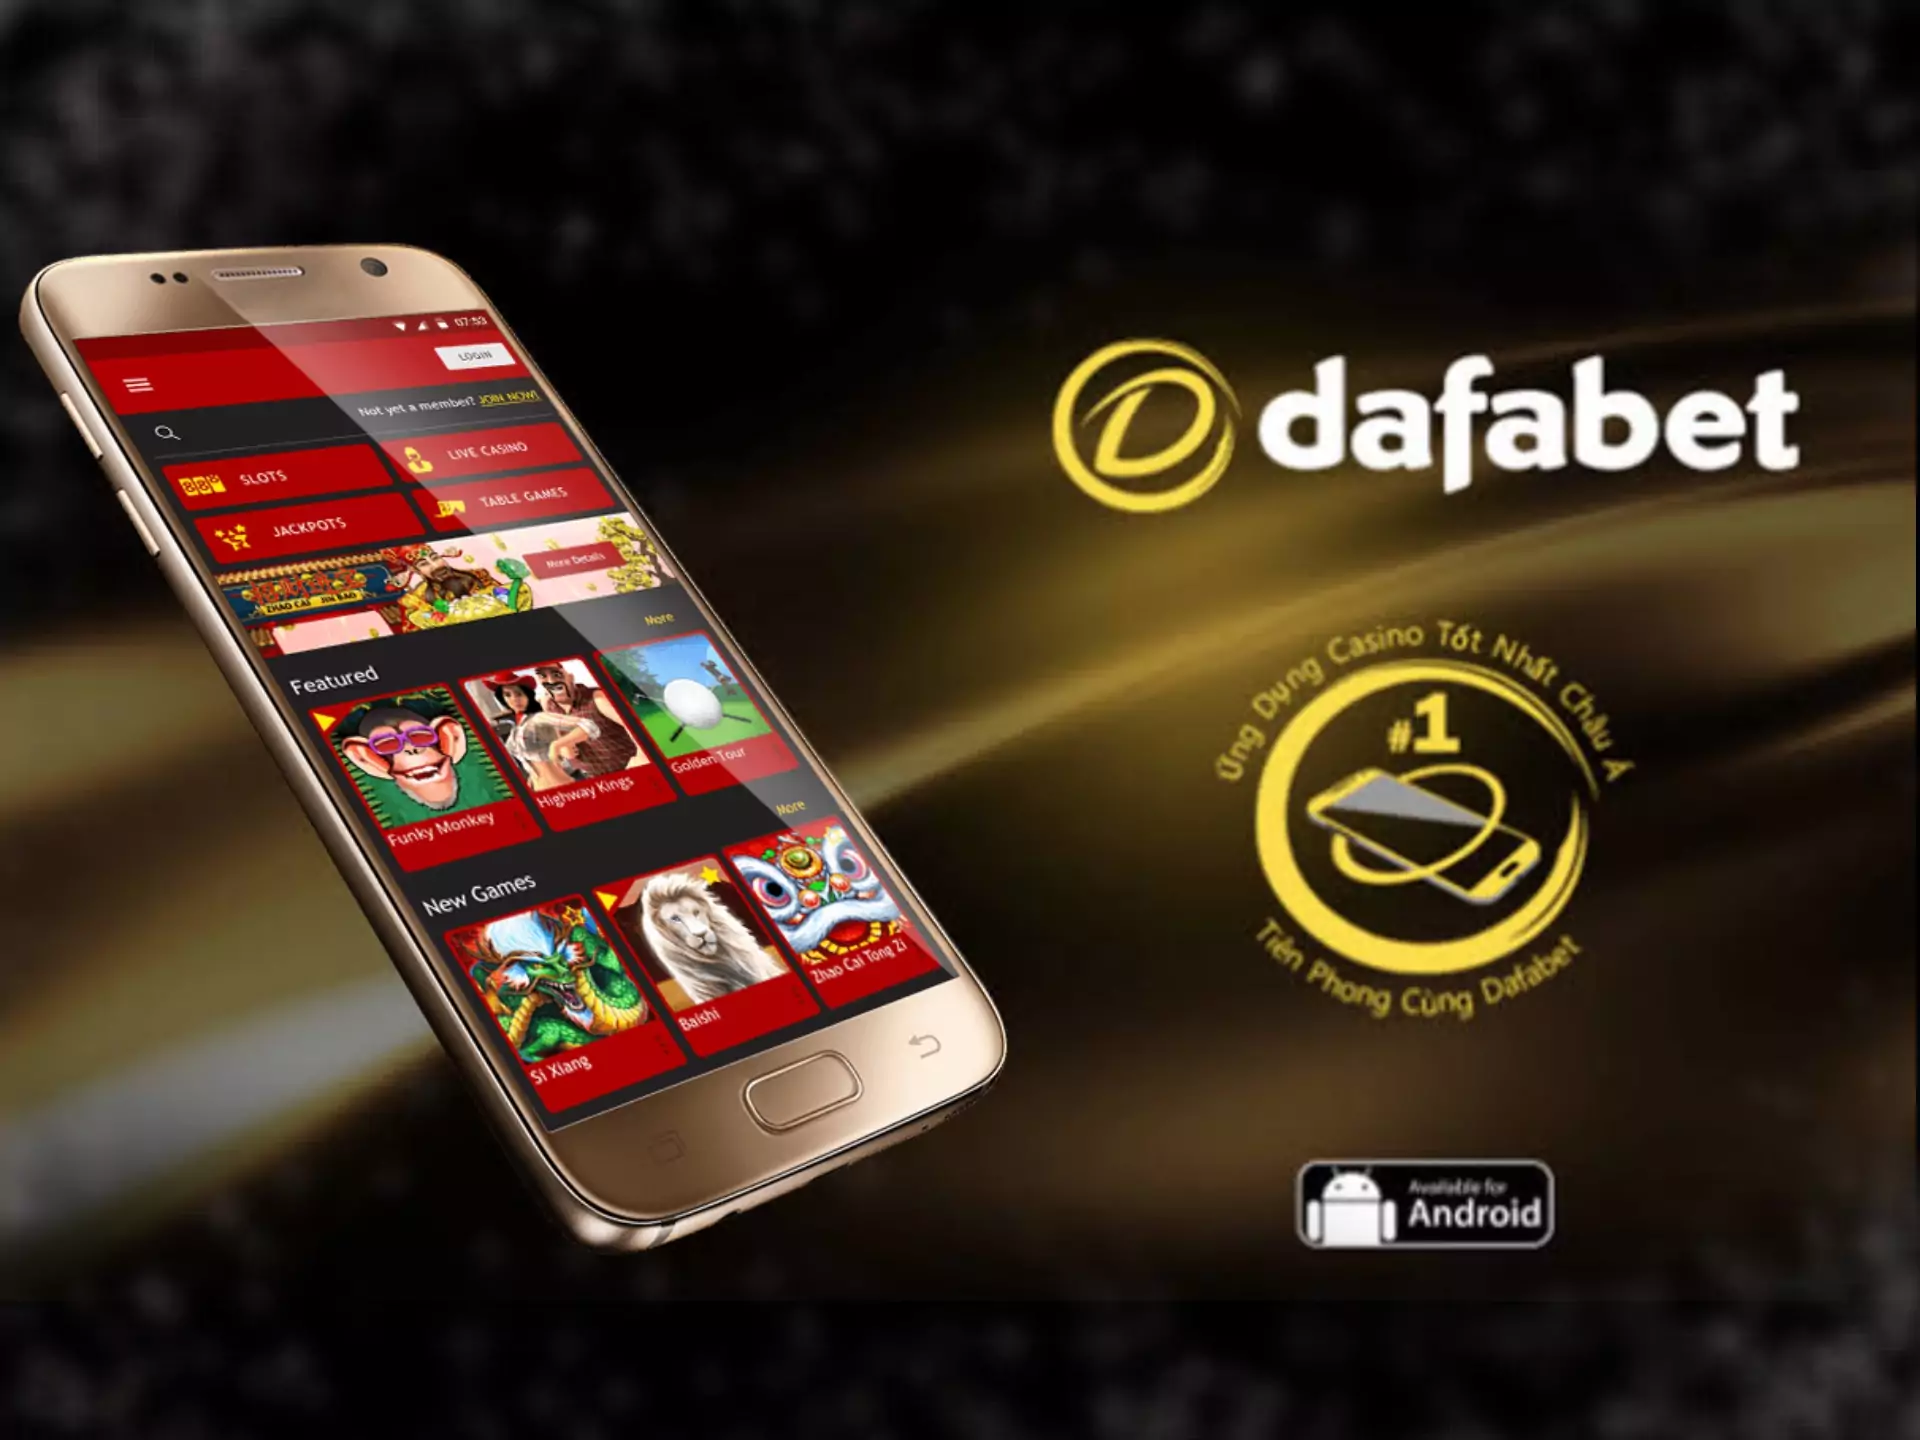 Check if your phone meets system requirements before installing Dafabet.